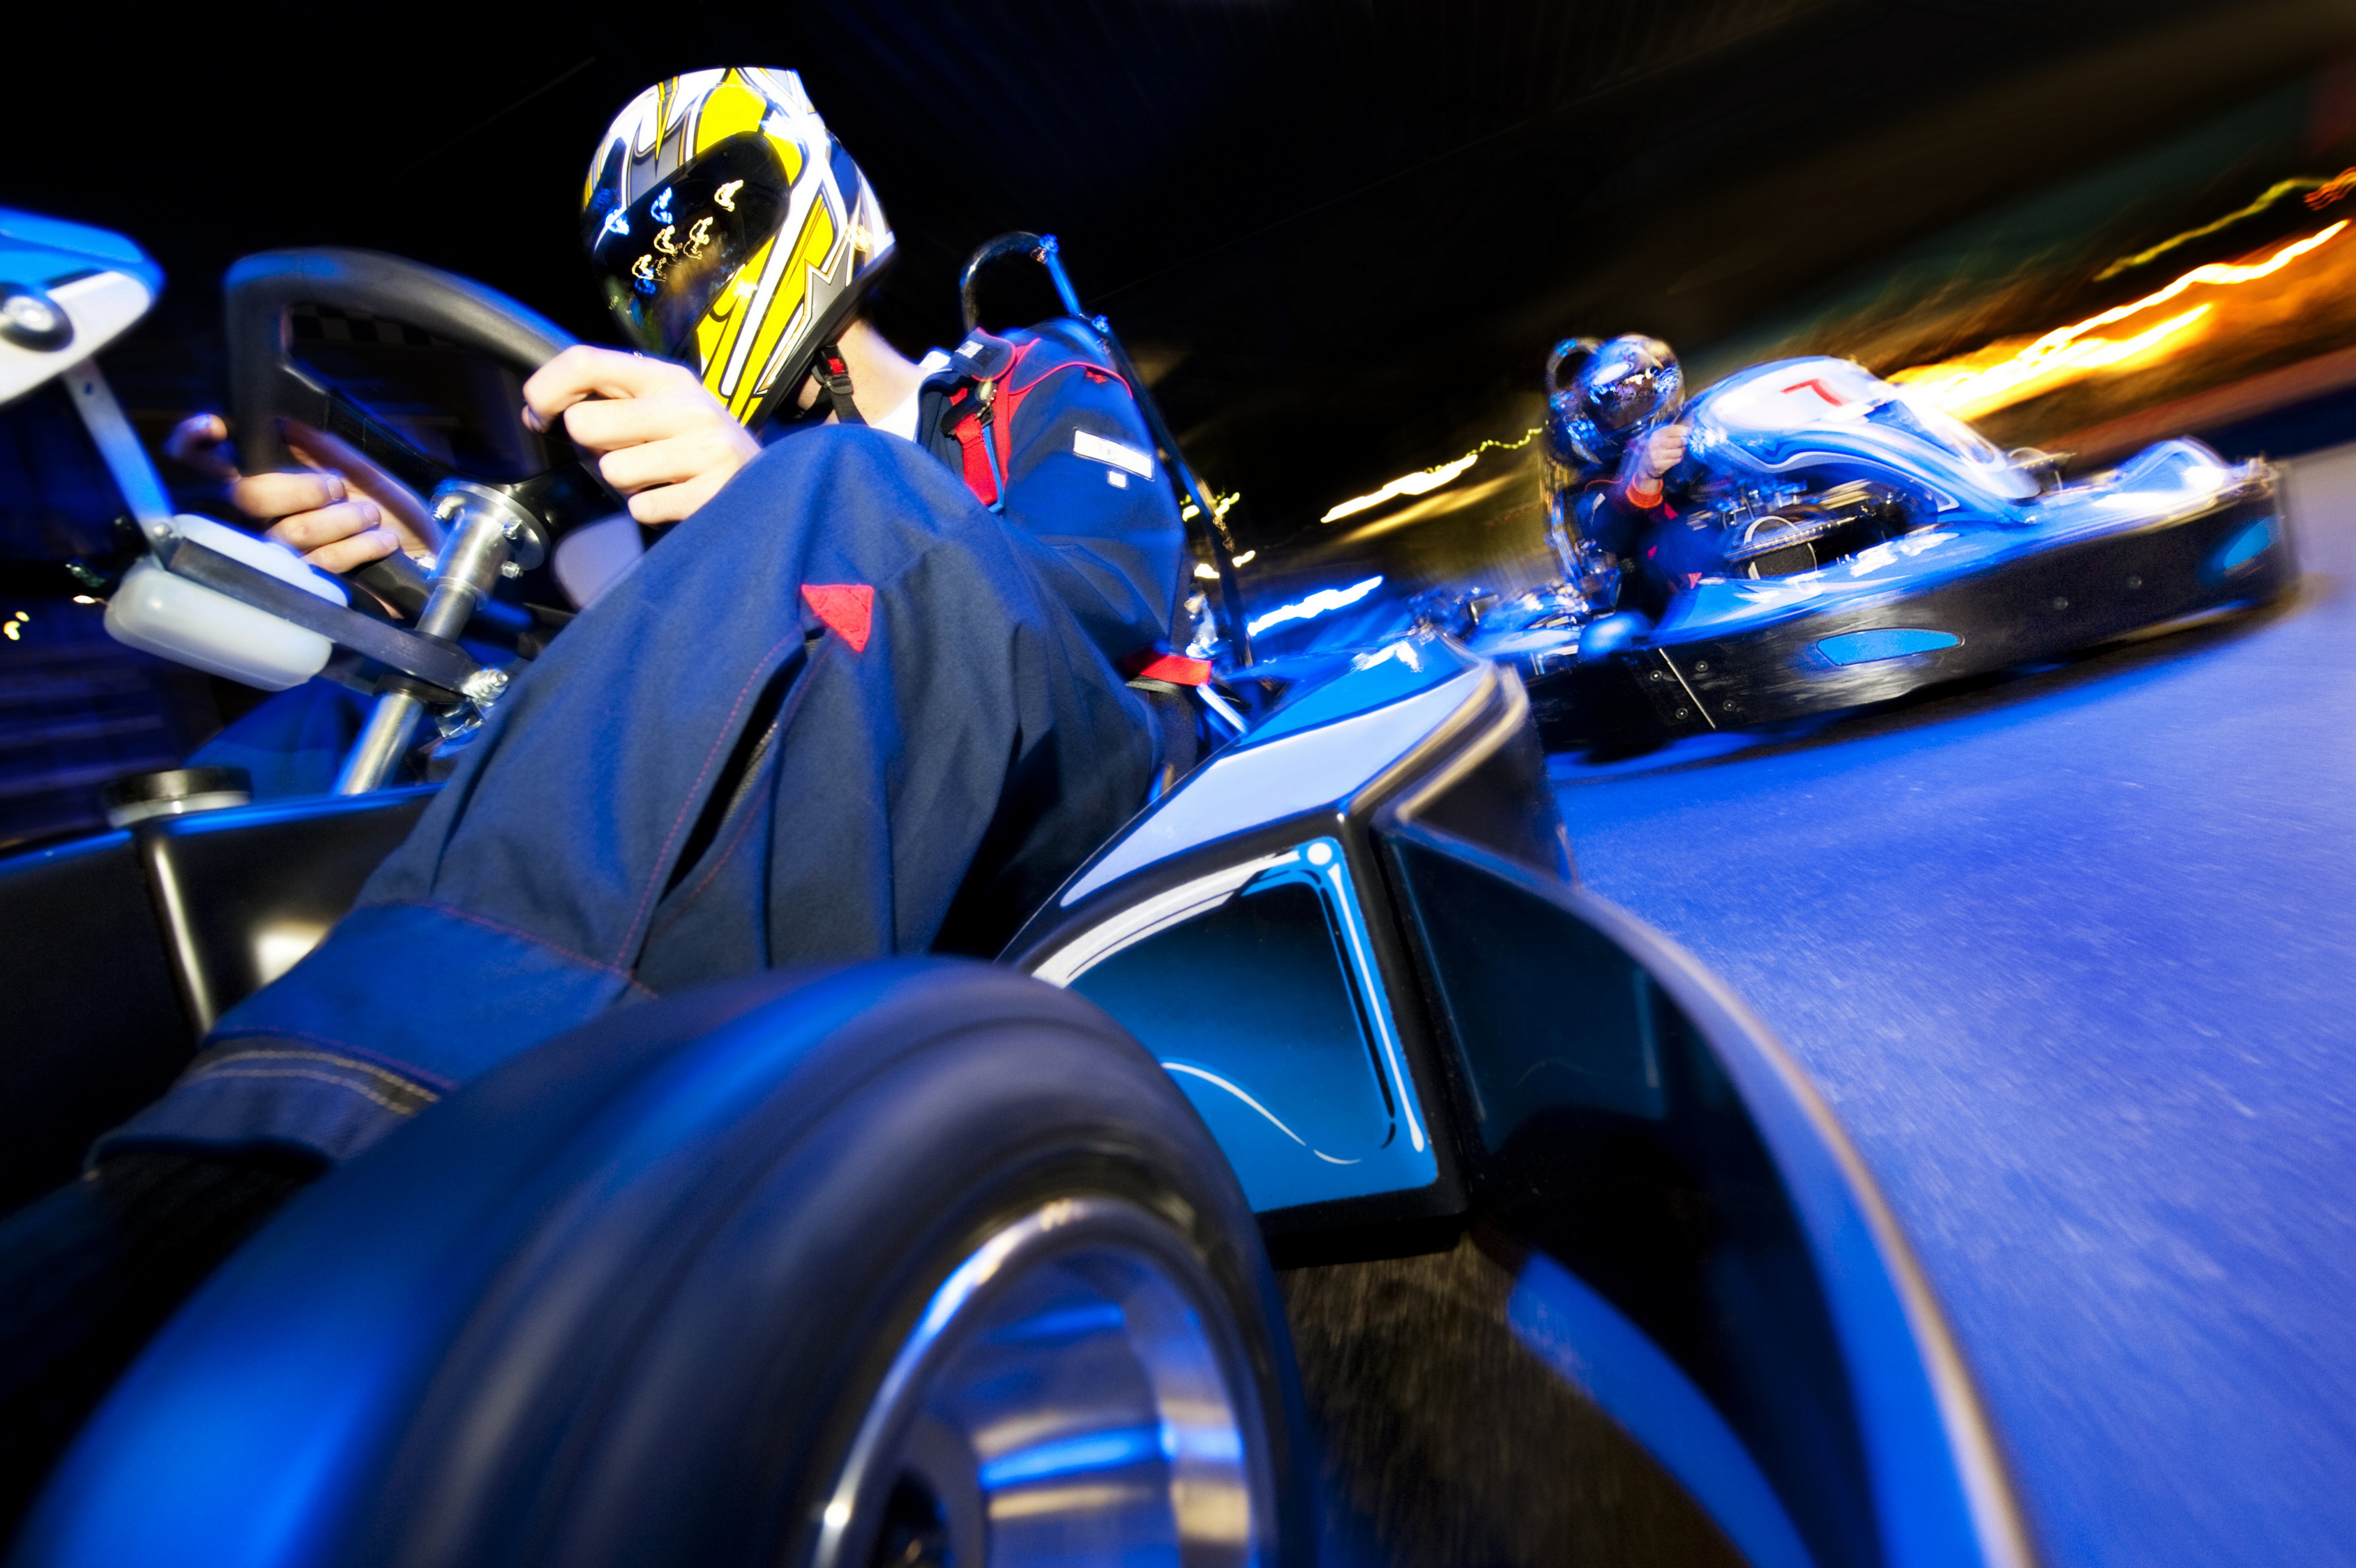 Grand Prix Karting for 2 Gift Experience